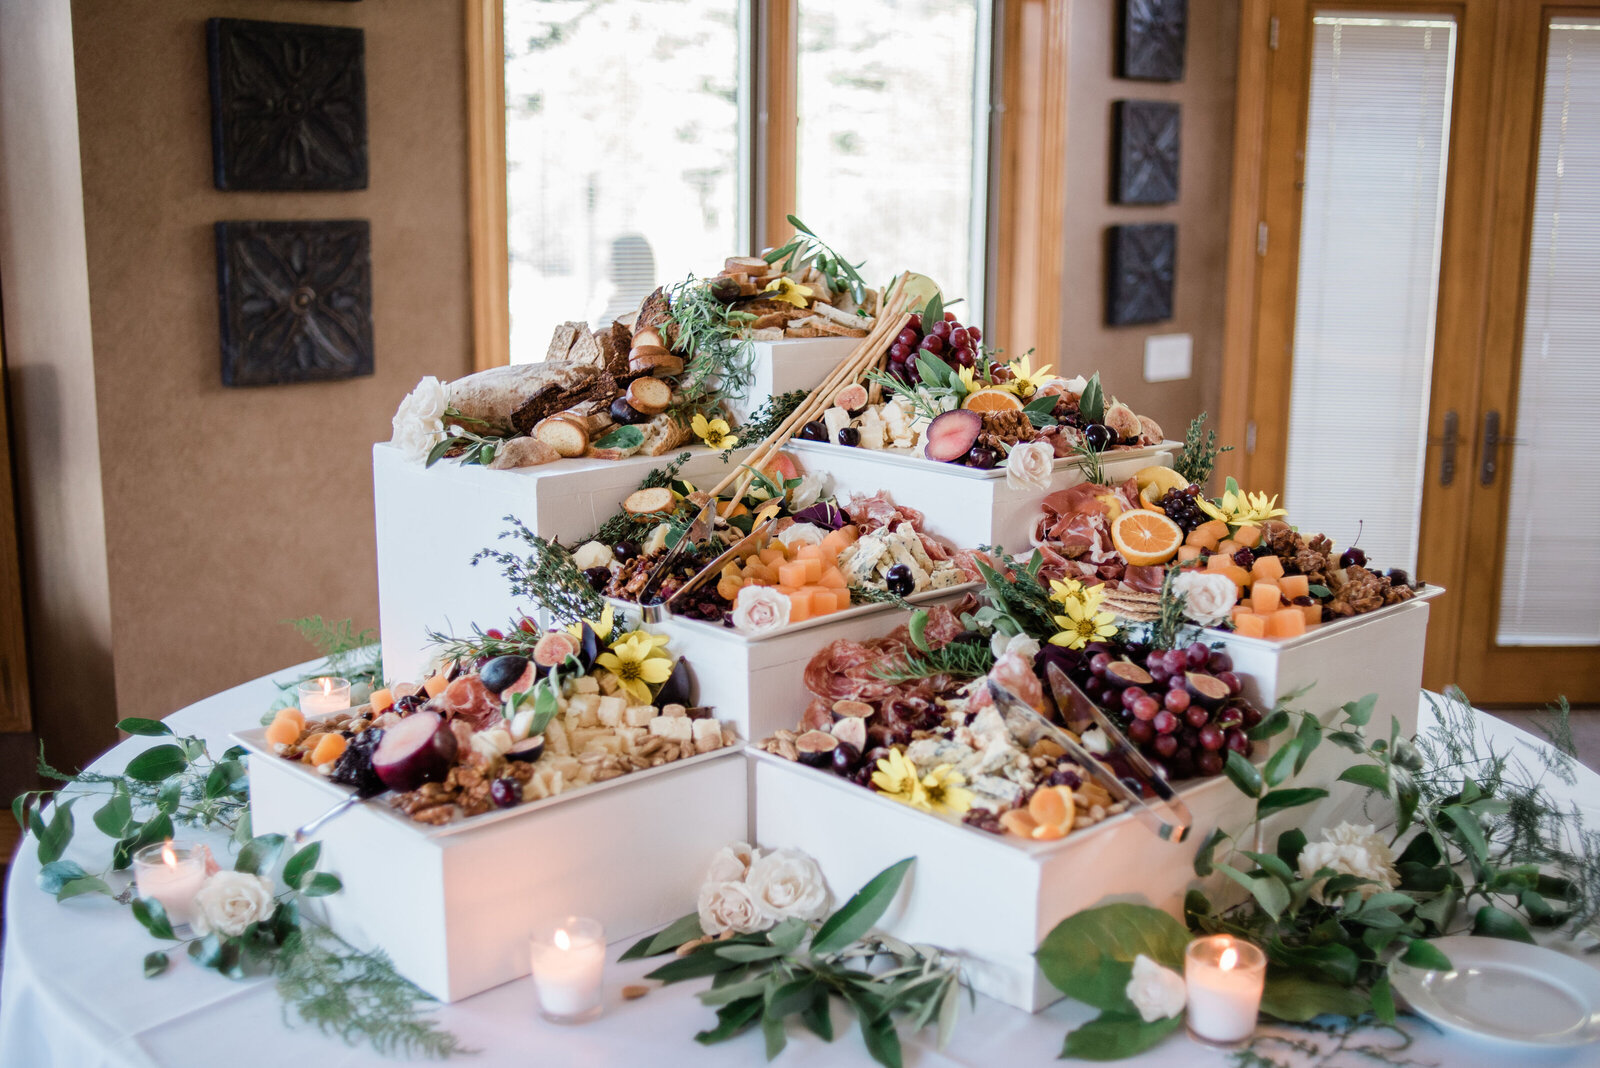 Wedding reception with appetizer display